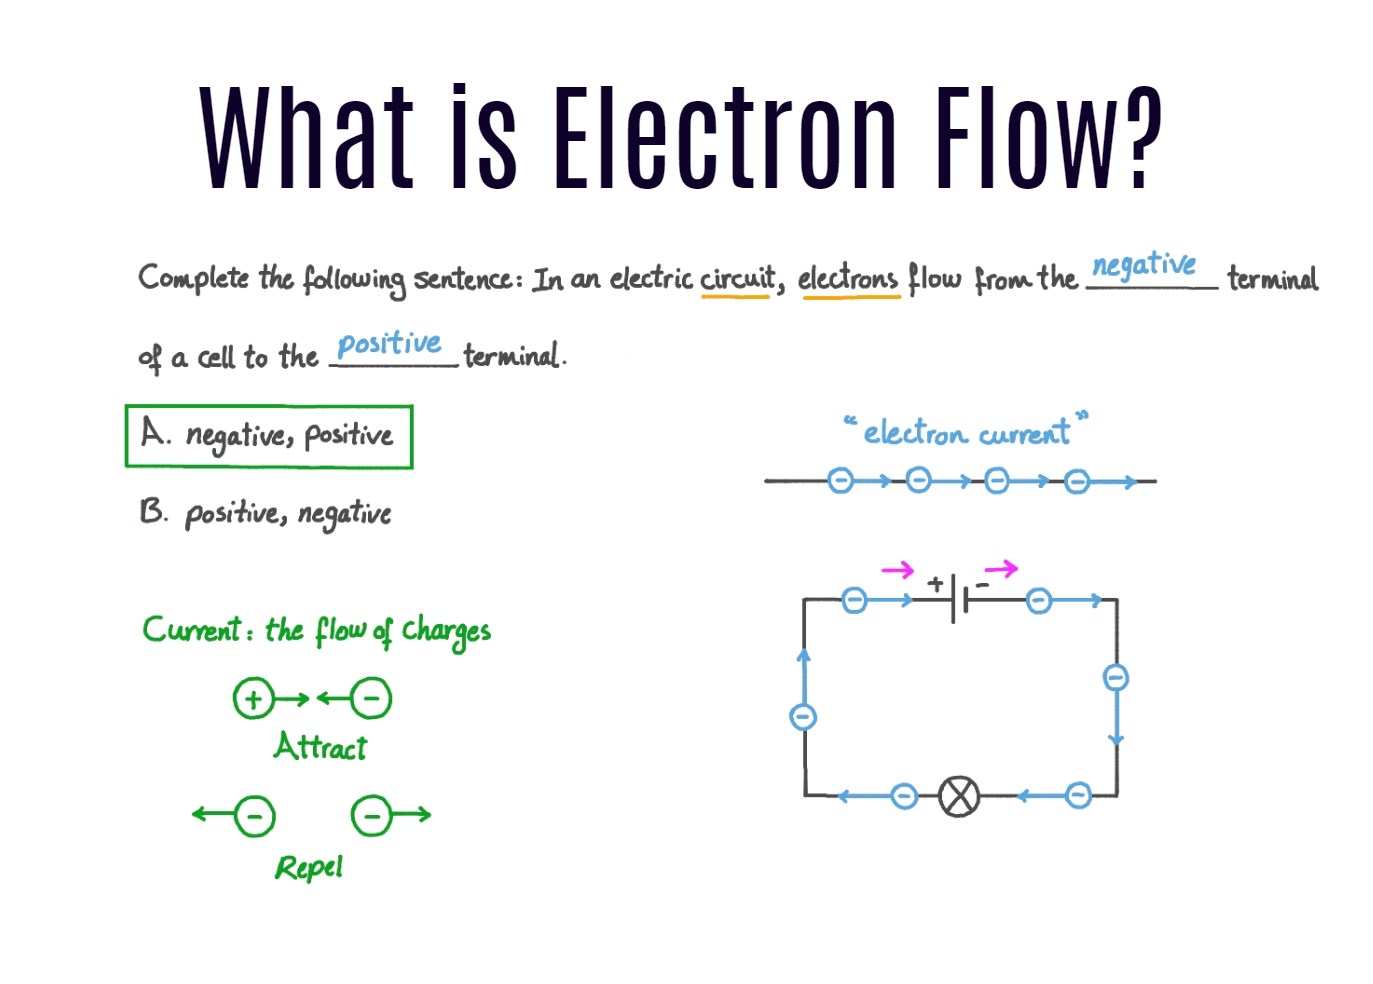 what is Electron Flow. Let's Talk about the Electron Flow